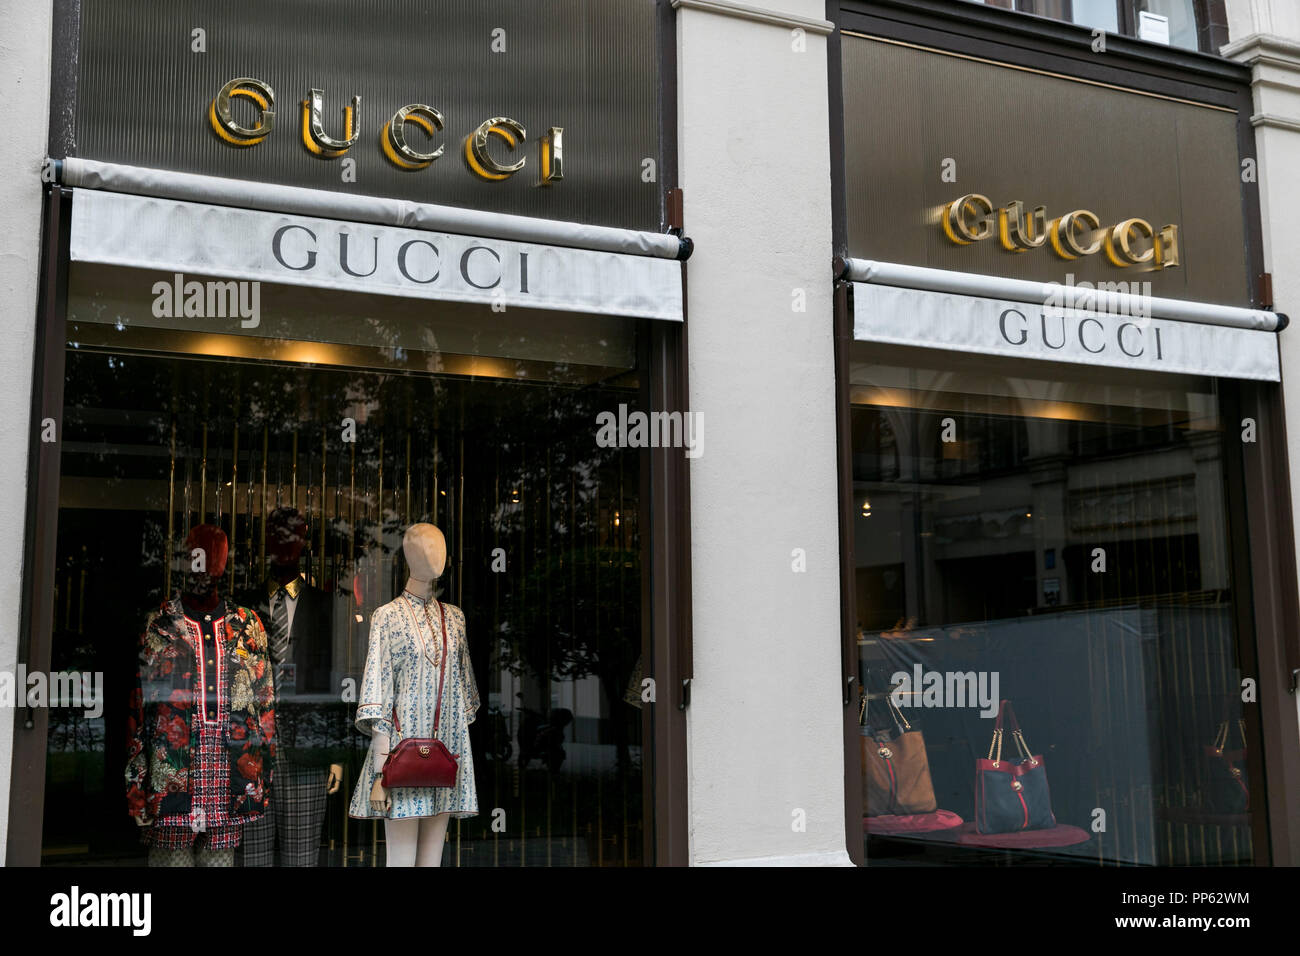 Gucci Storefront High Resolution Stock Photography and Images - Alamy